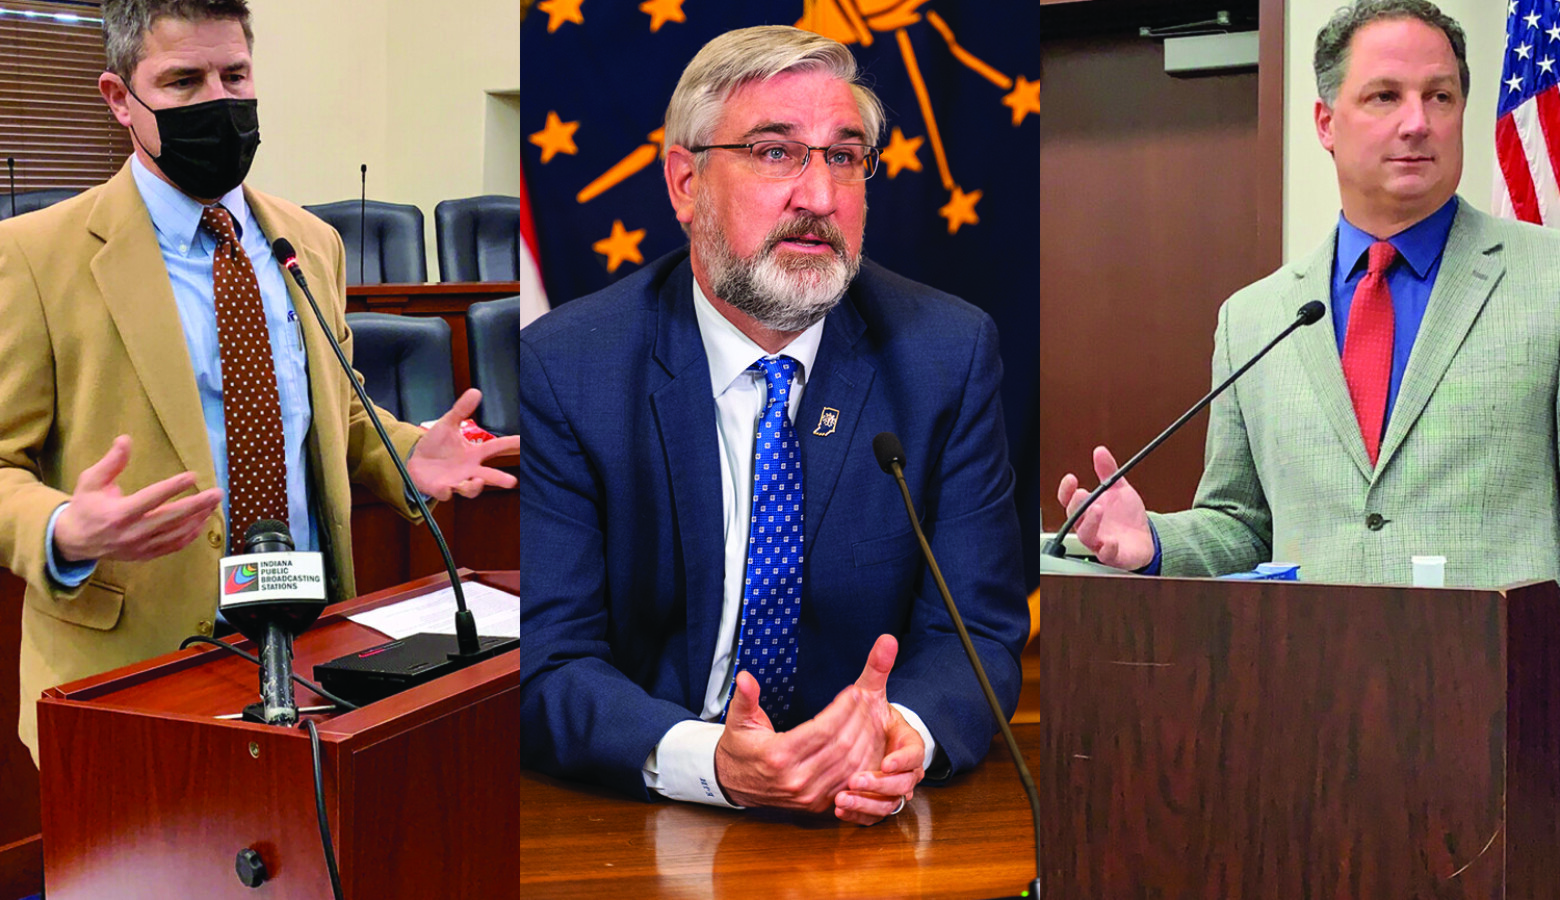 Gov. Eric Holcomb, center, sued the Indiana General Assembly, led by Senate President Pro Tem Rodric Bray (R-Martinsville), left and House Speaker Todd Huston (R-Fishers), right, over an emergency powers law. (Brandon Smith/IPB News and courtesy of the go